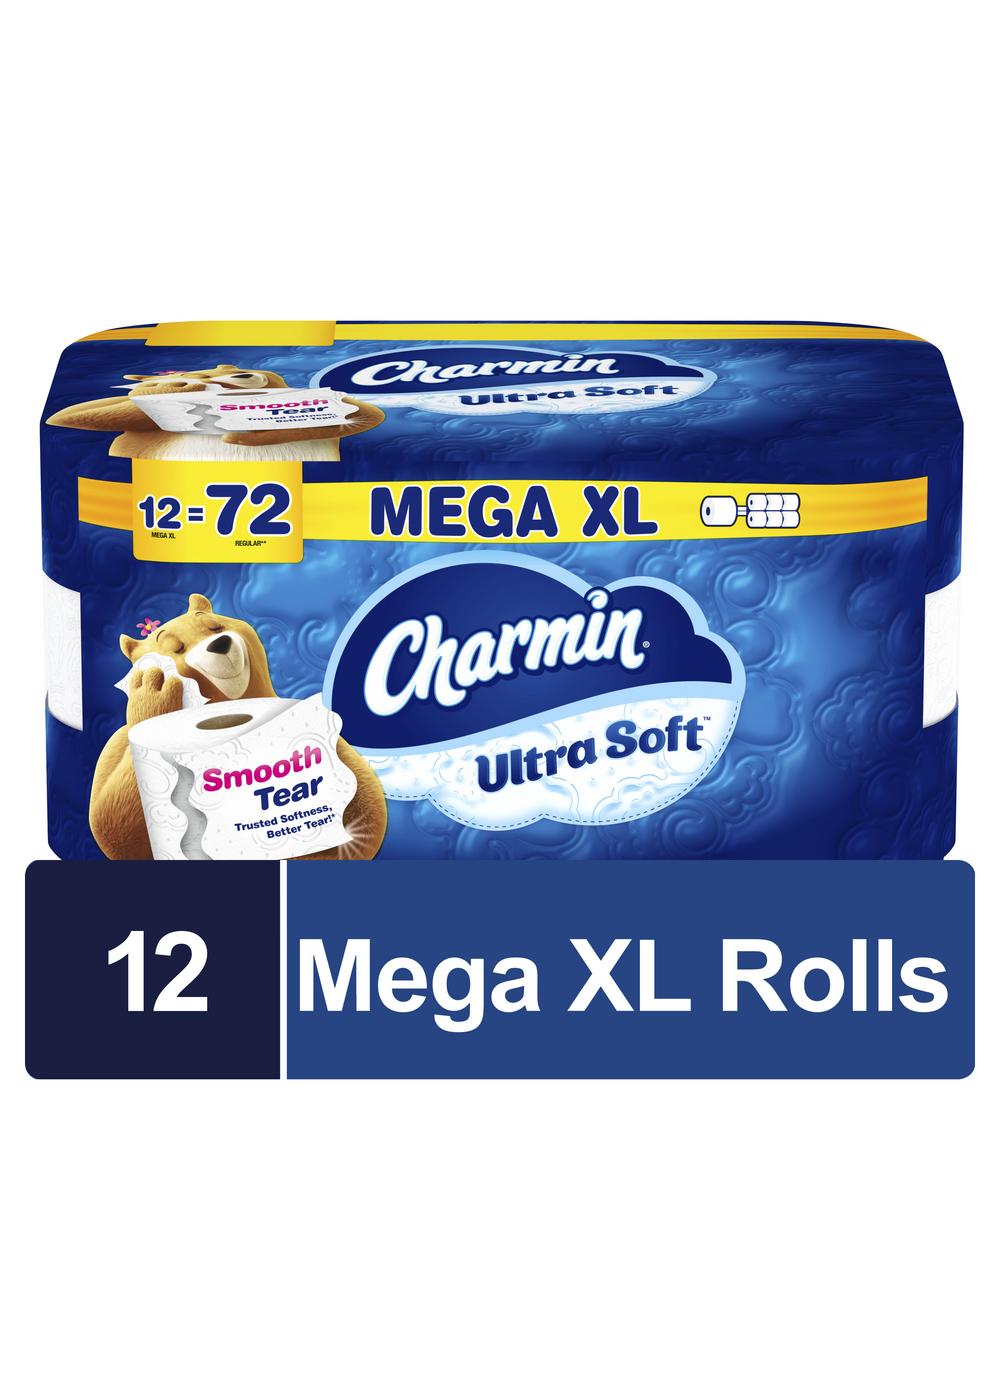 Charmin Ultra Soft Smooth Tear Toilet Paper; image 4 of 7